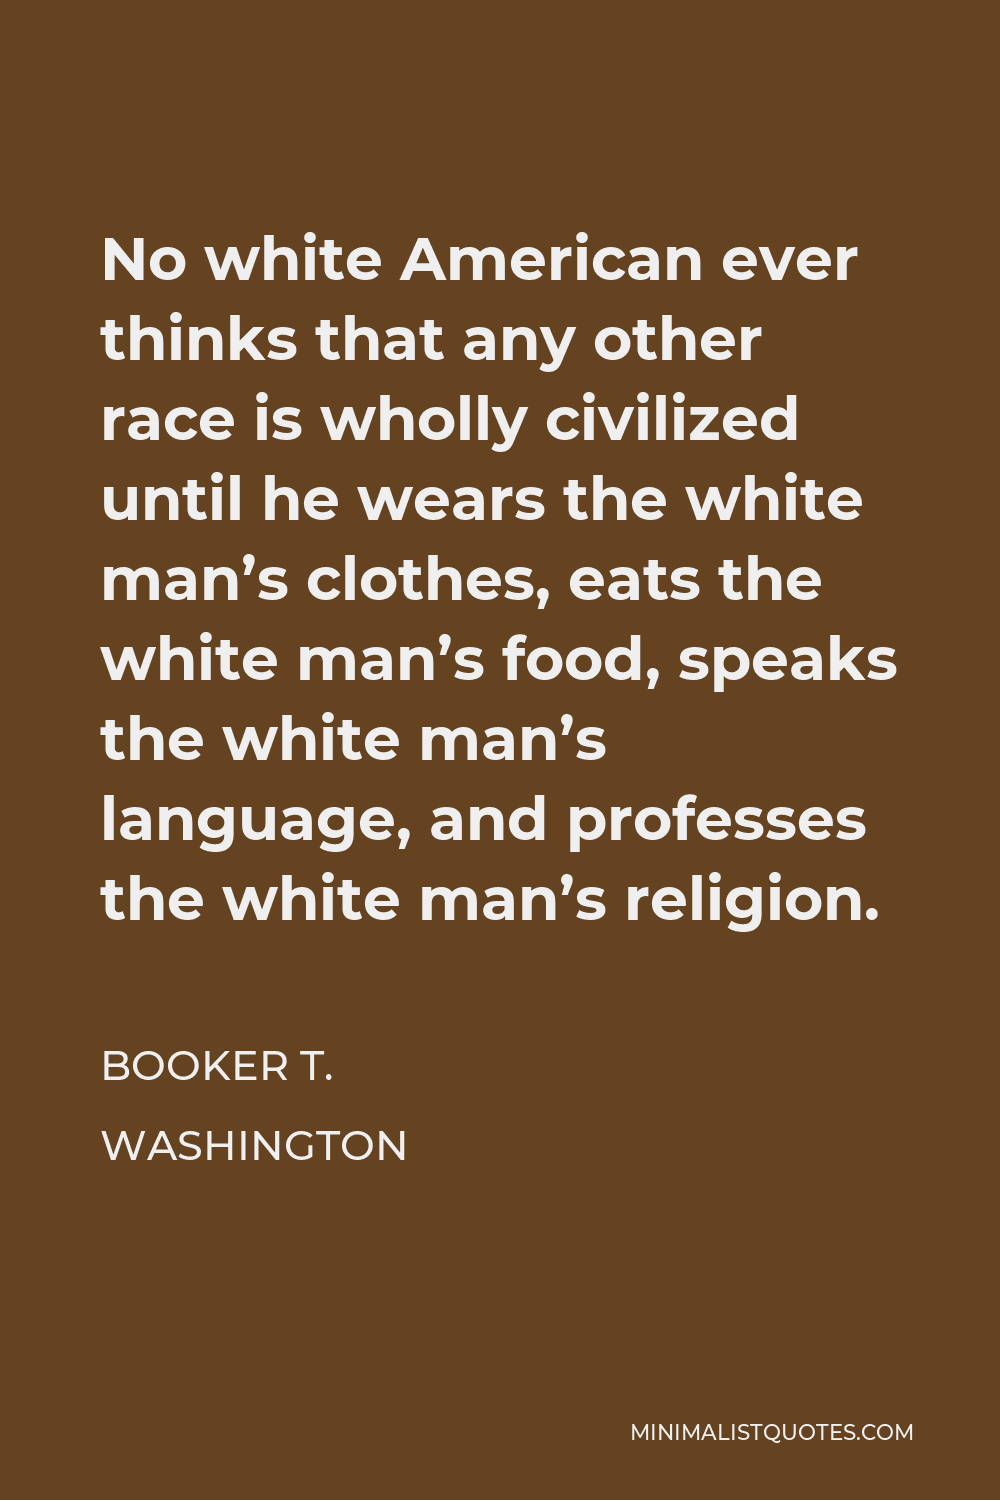 Booker T. Washington Quote - No white American ever thinks that any other race is wholly civilized until he wears the white man’s clothes, eats the white man’s food, speaks the white man’s language, and professes the white man’s religion.